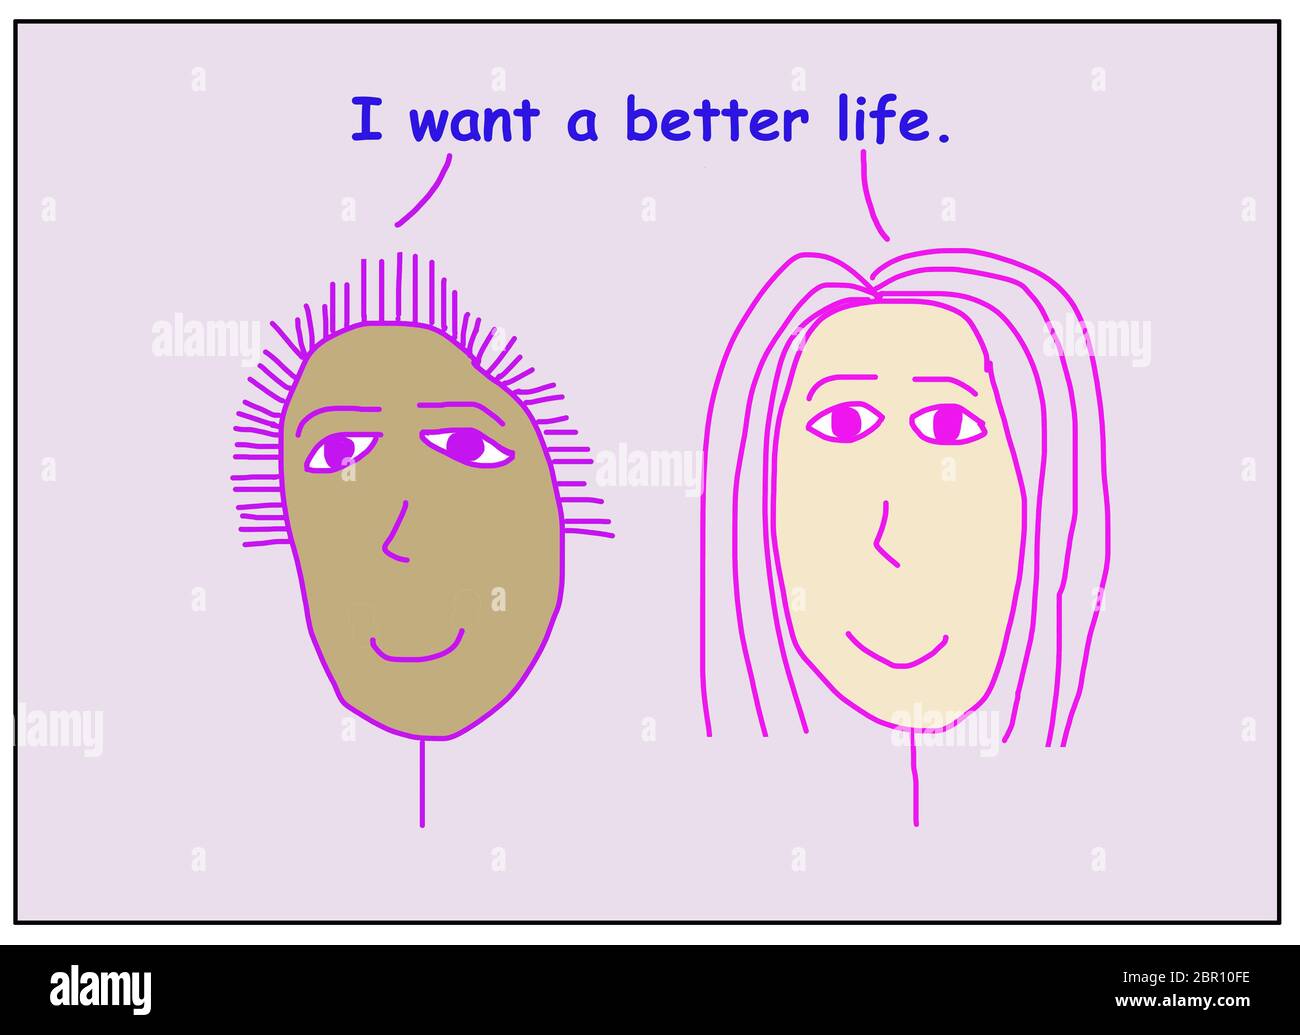 Color cartoon of two smiling, beautiful, and ethnically diverse women stating I want a better life. Stock Photo